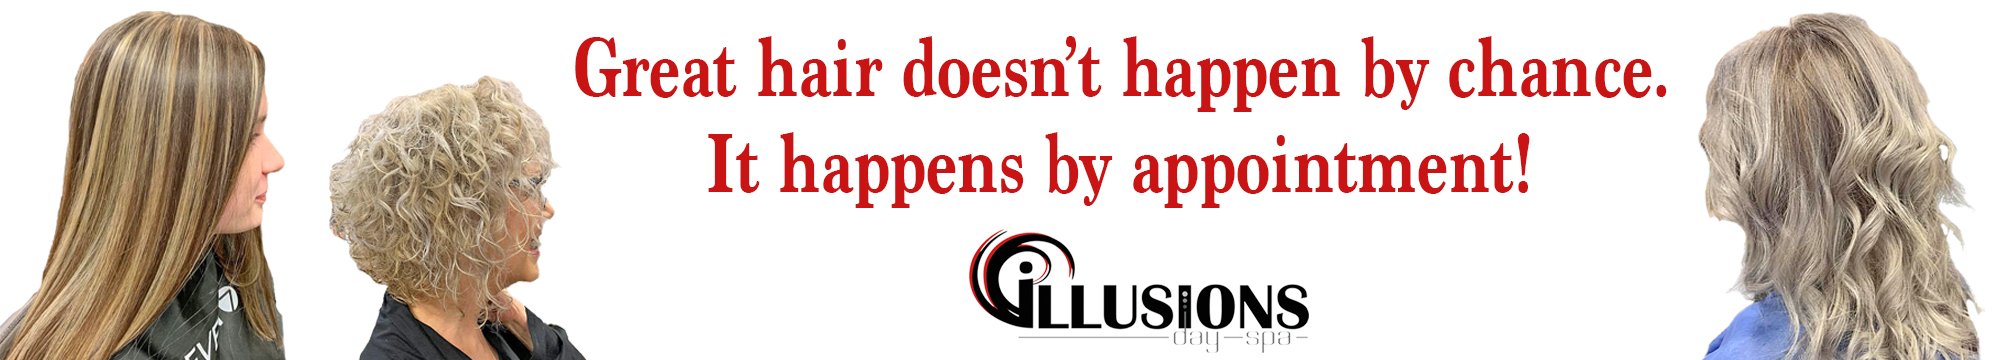 Illusions Great Hair